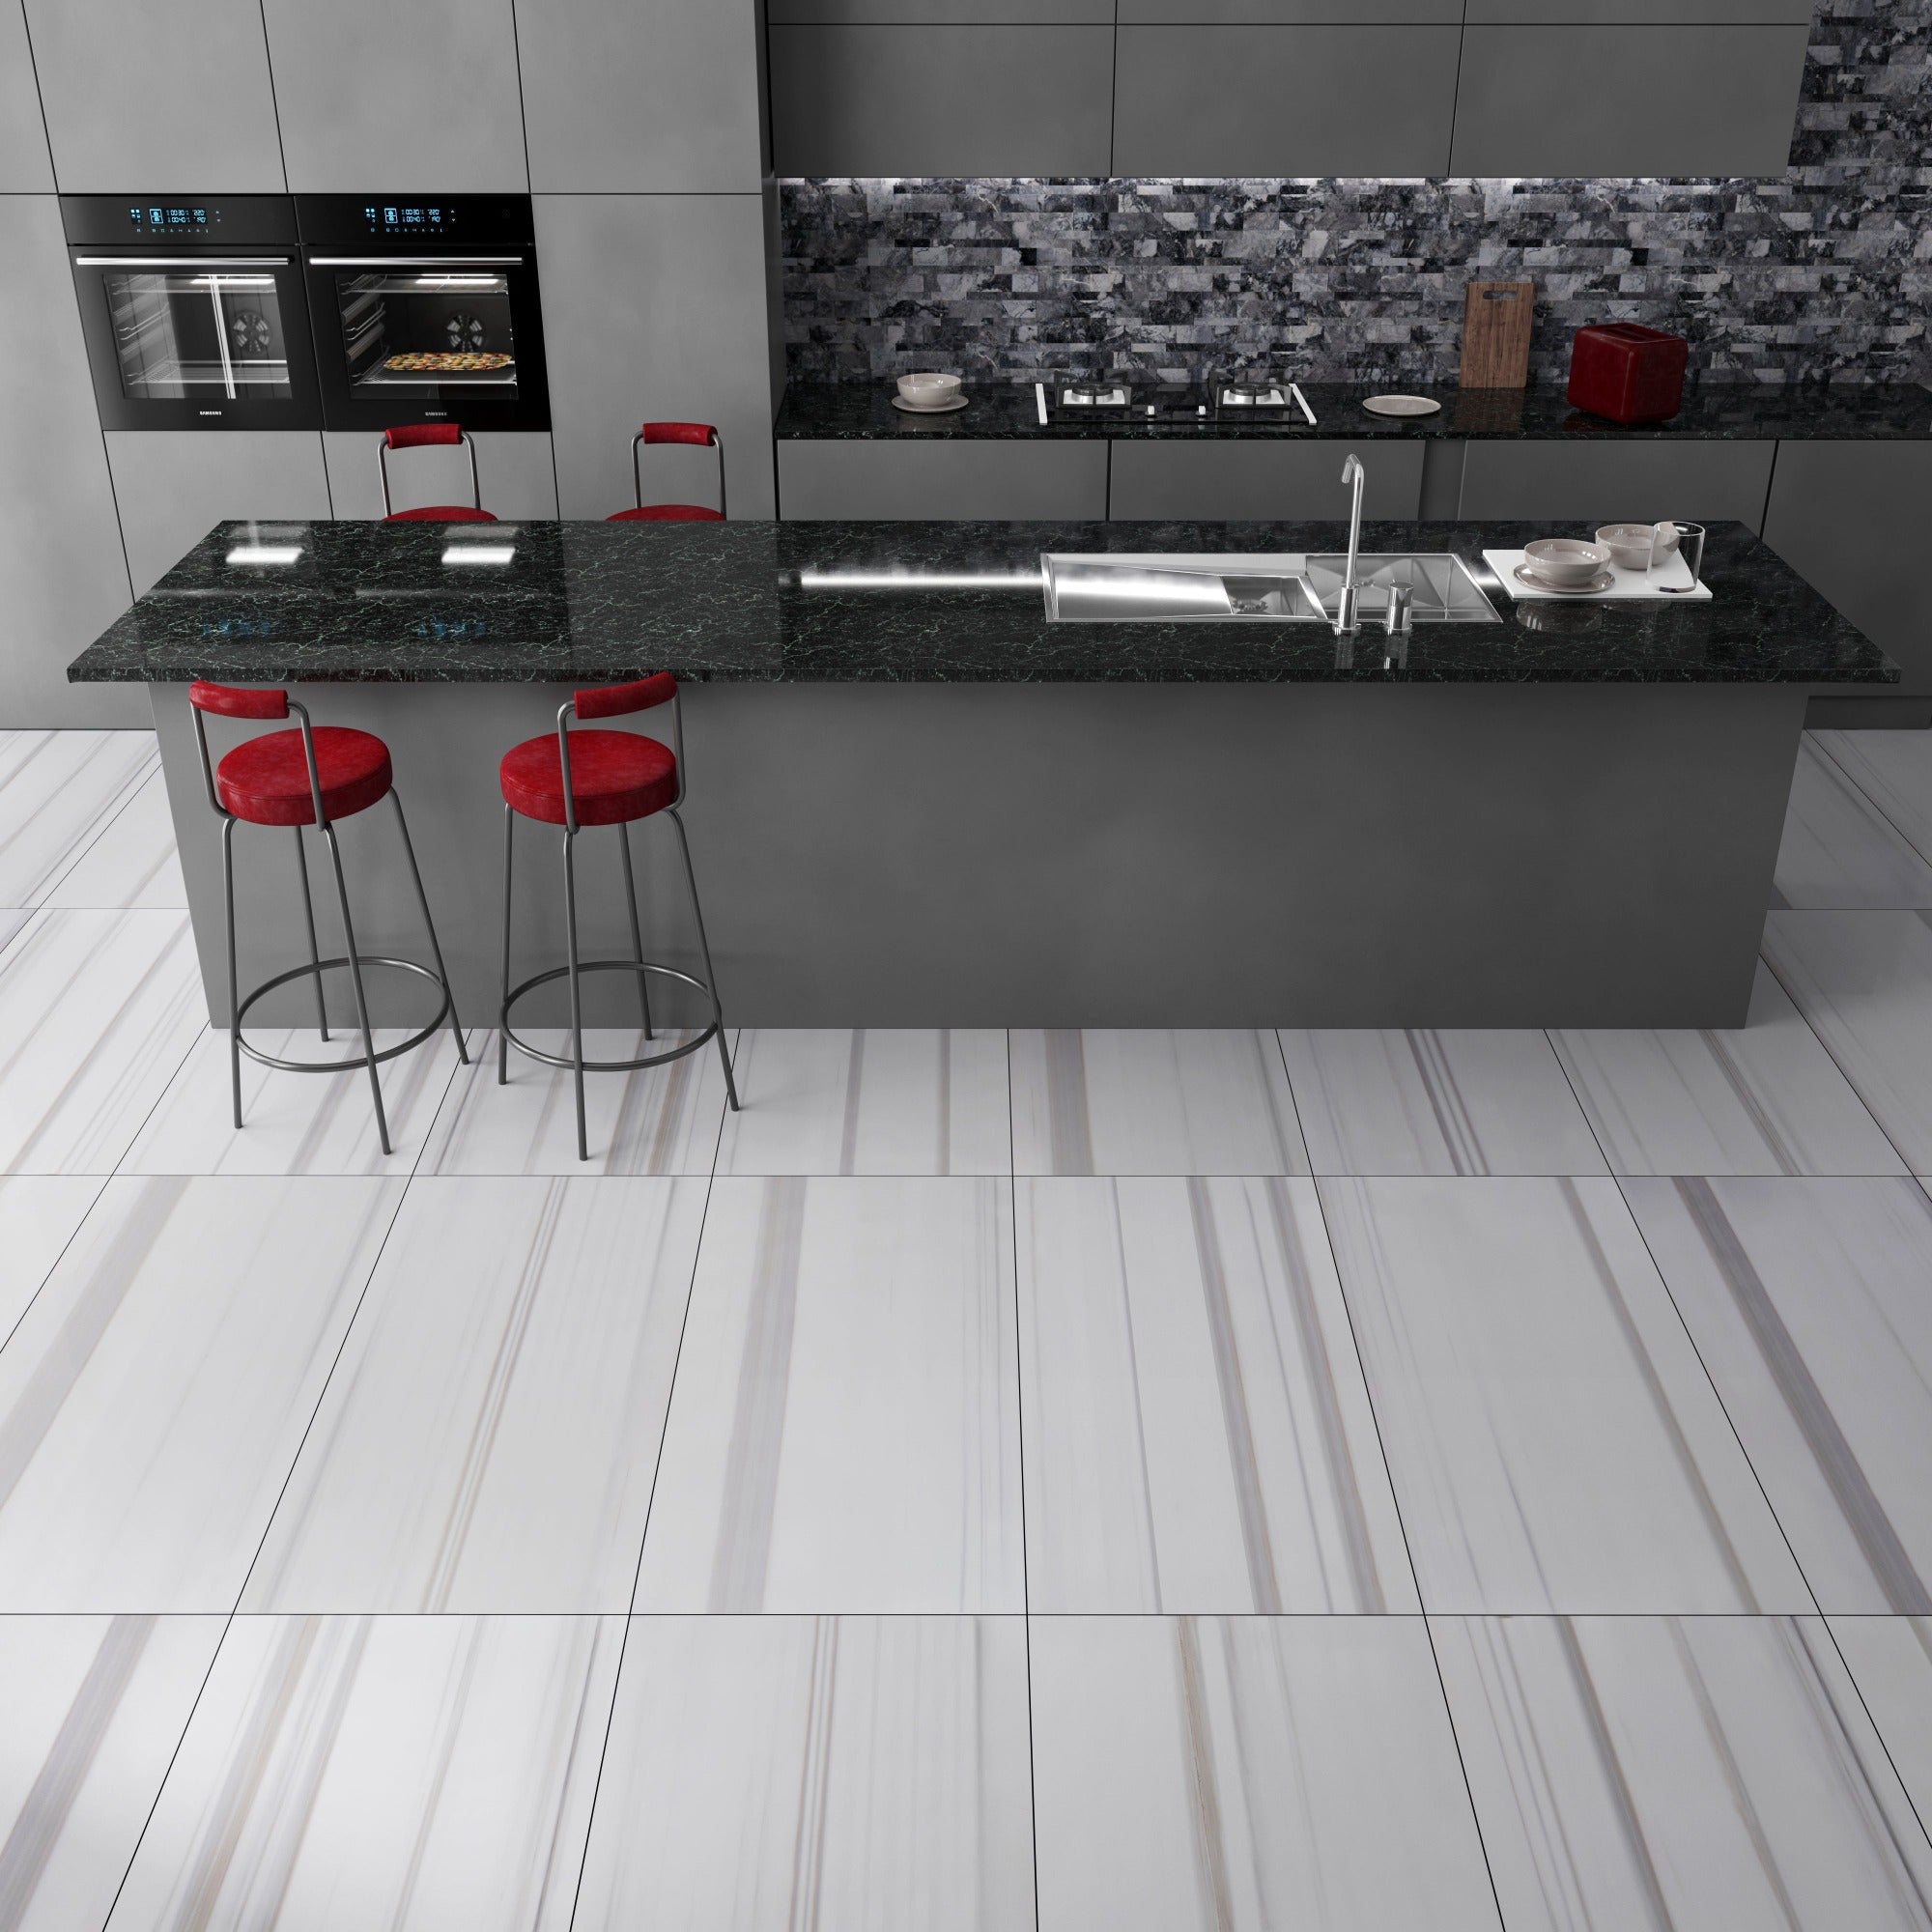 Dolomite Isola Marble Tile Polished 24x48 $37.00/SF All Marble Tiles